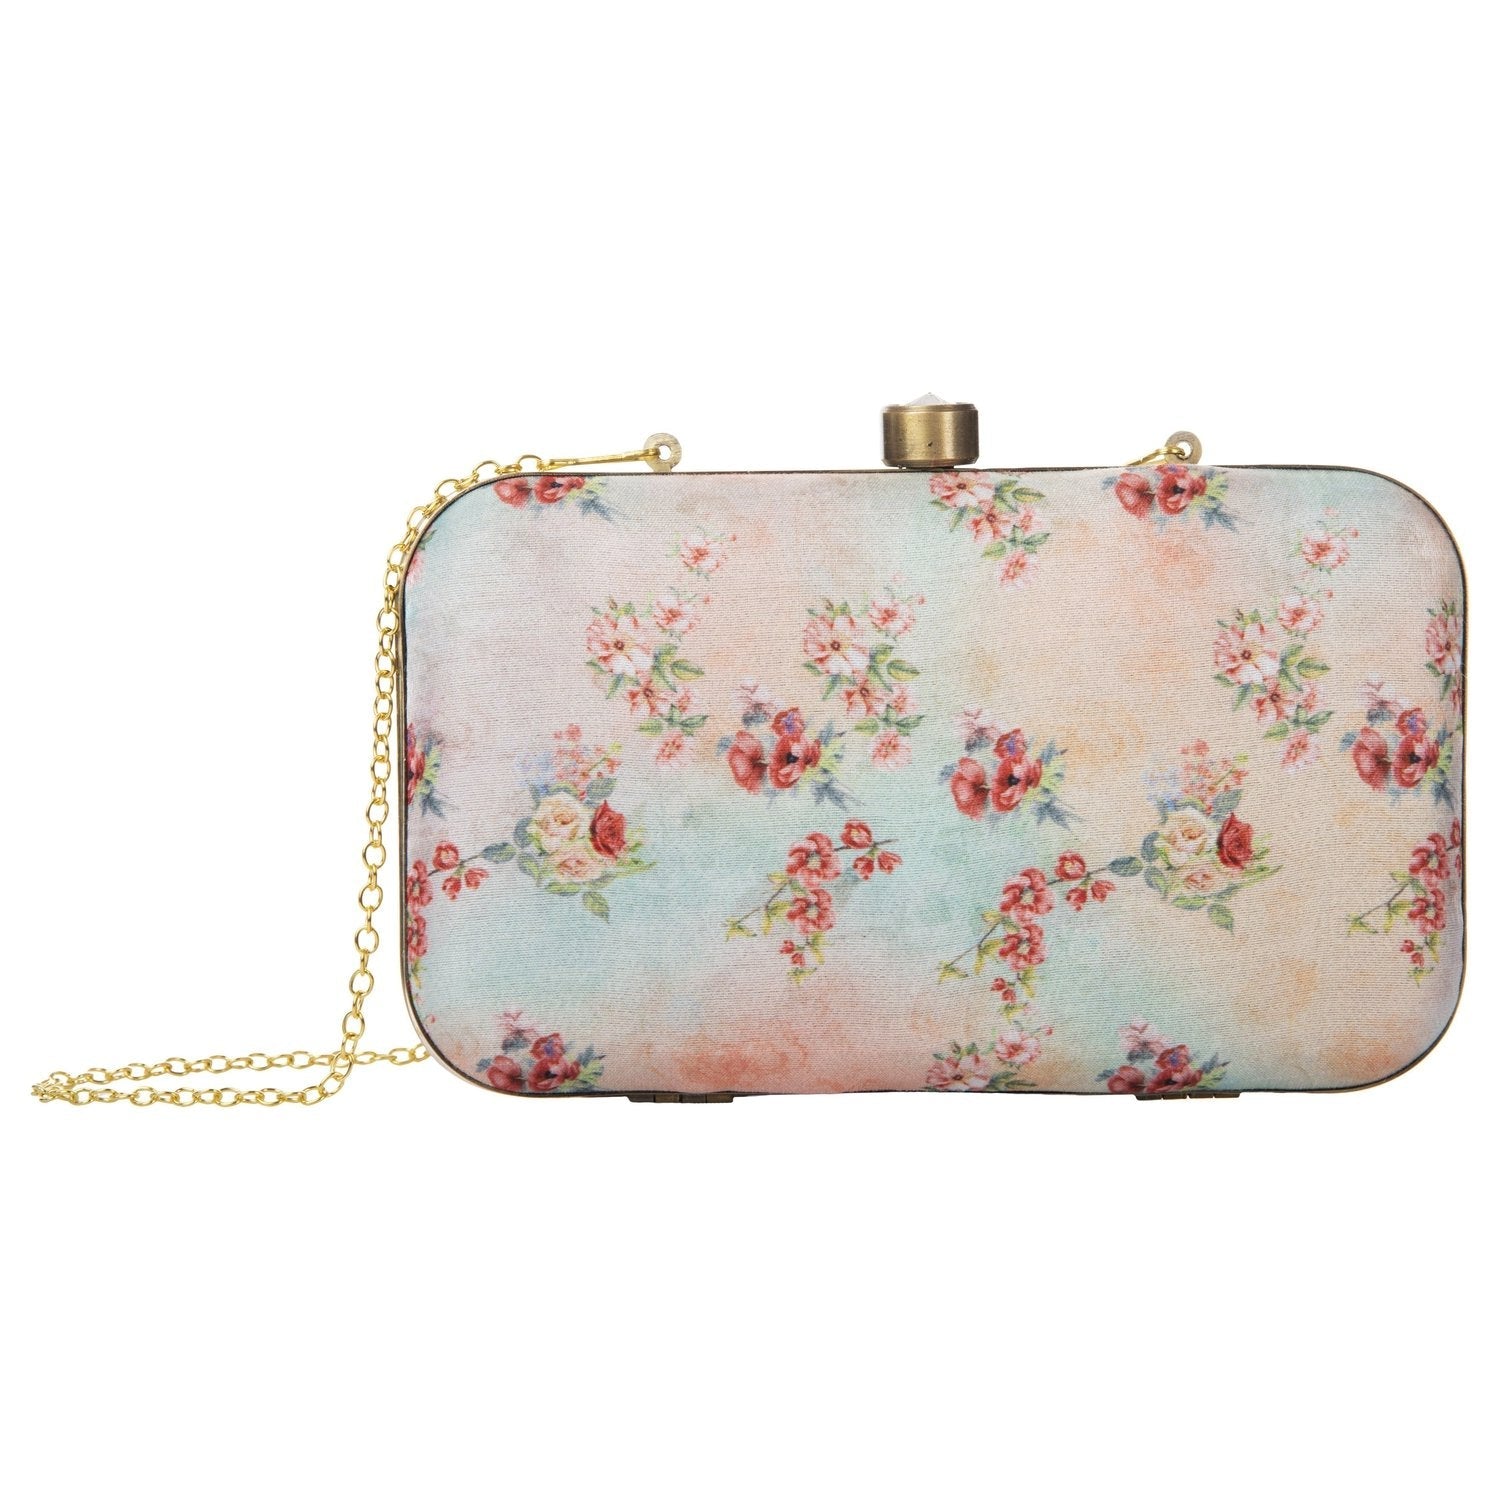 Clutch Bags for Weddings | a Trend of the Season